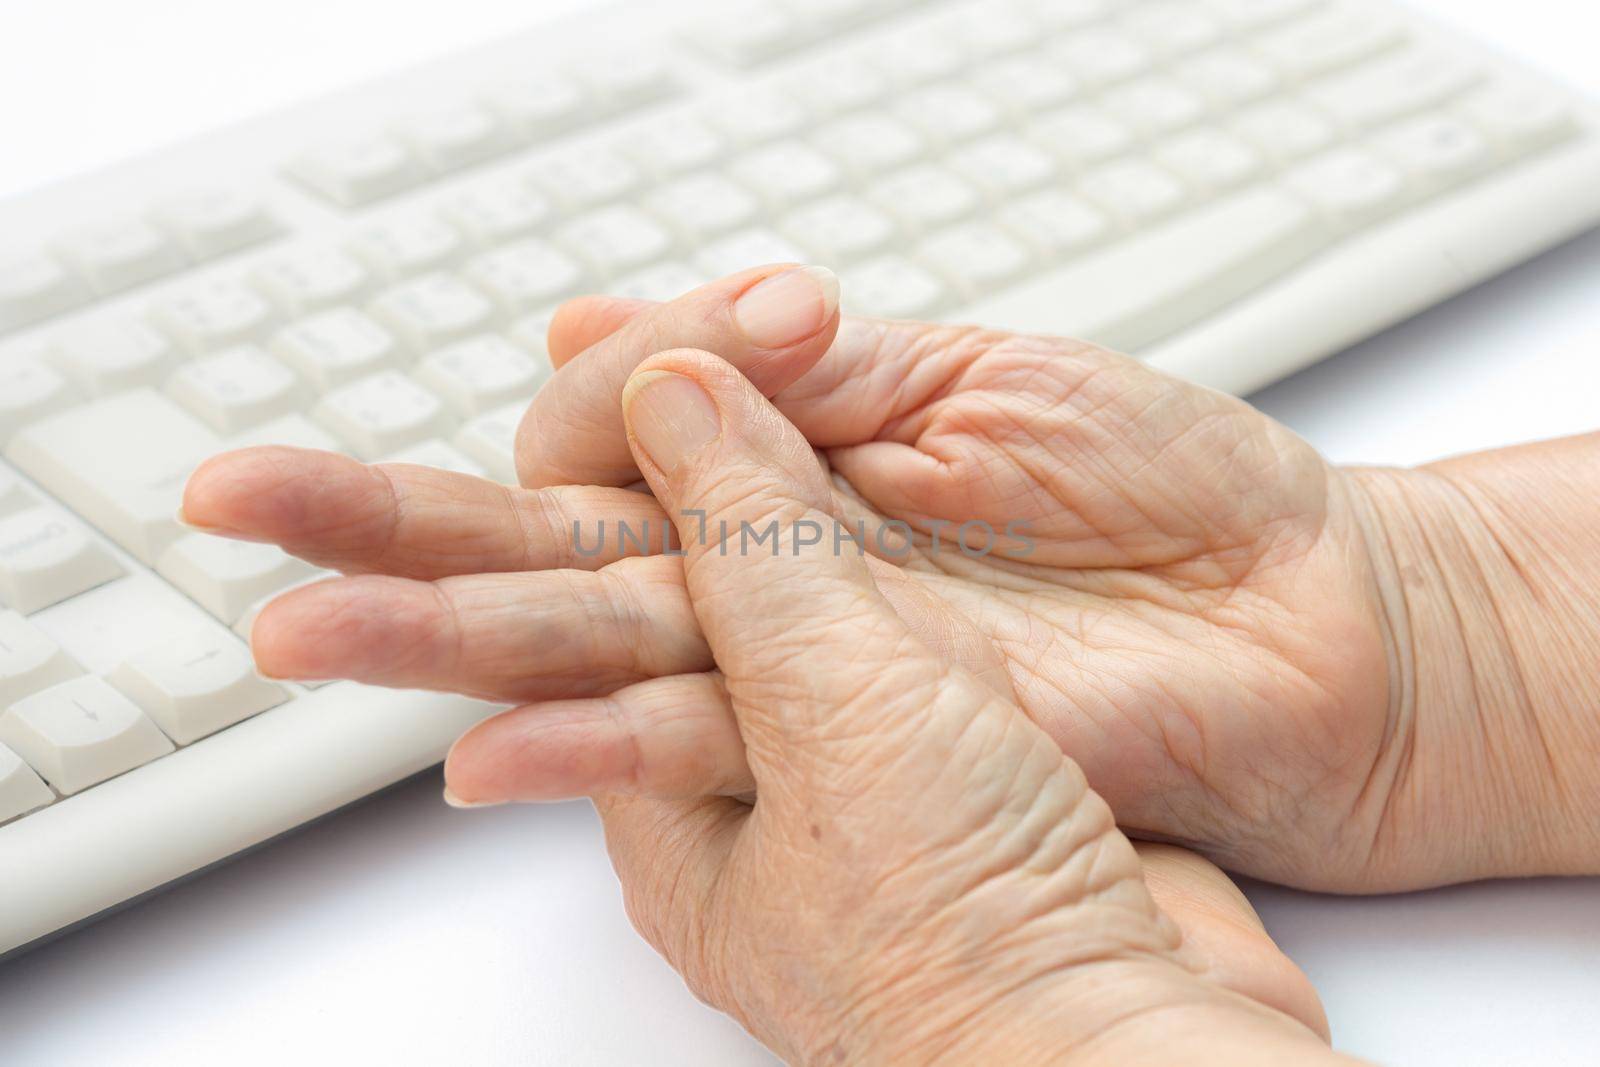 Senior woman painful finger due to prolonged use of keyboard and mouse.